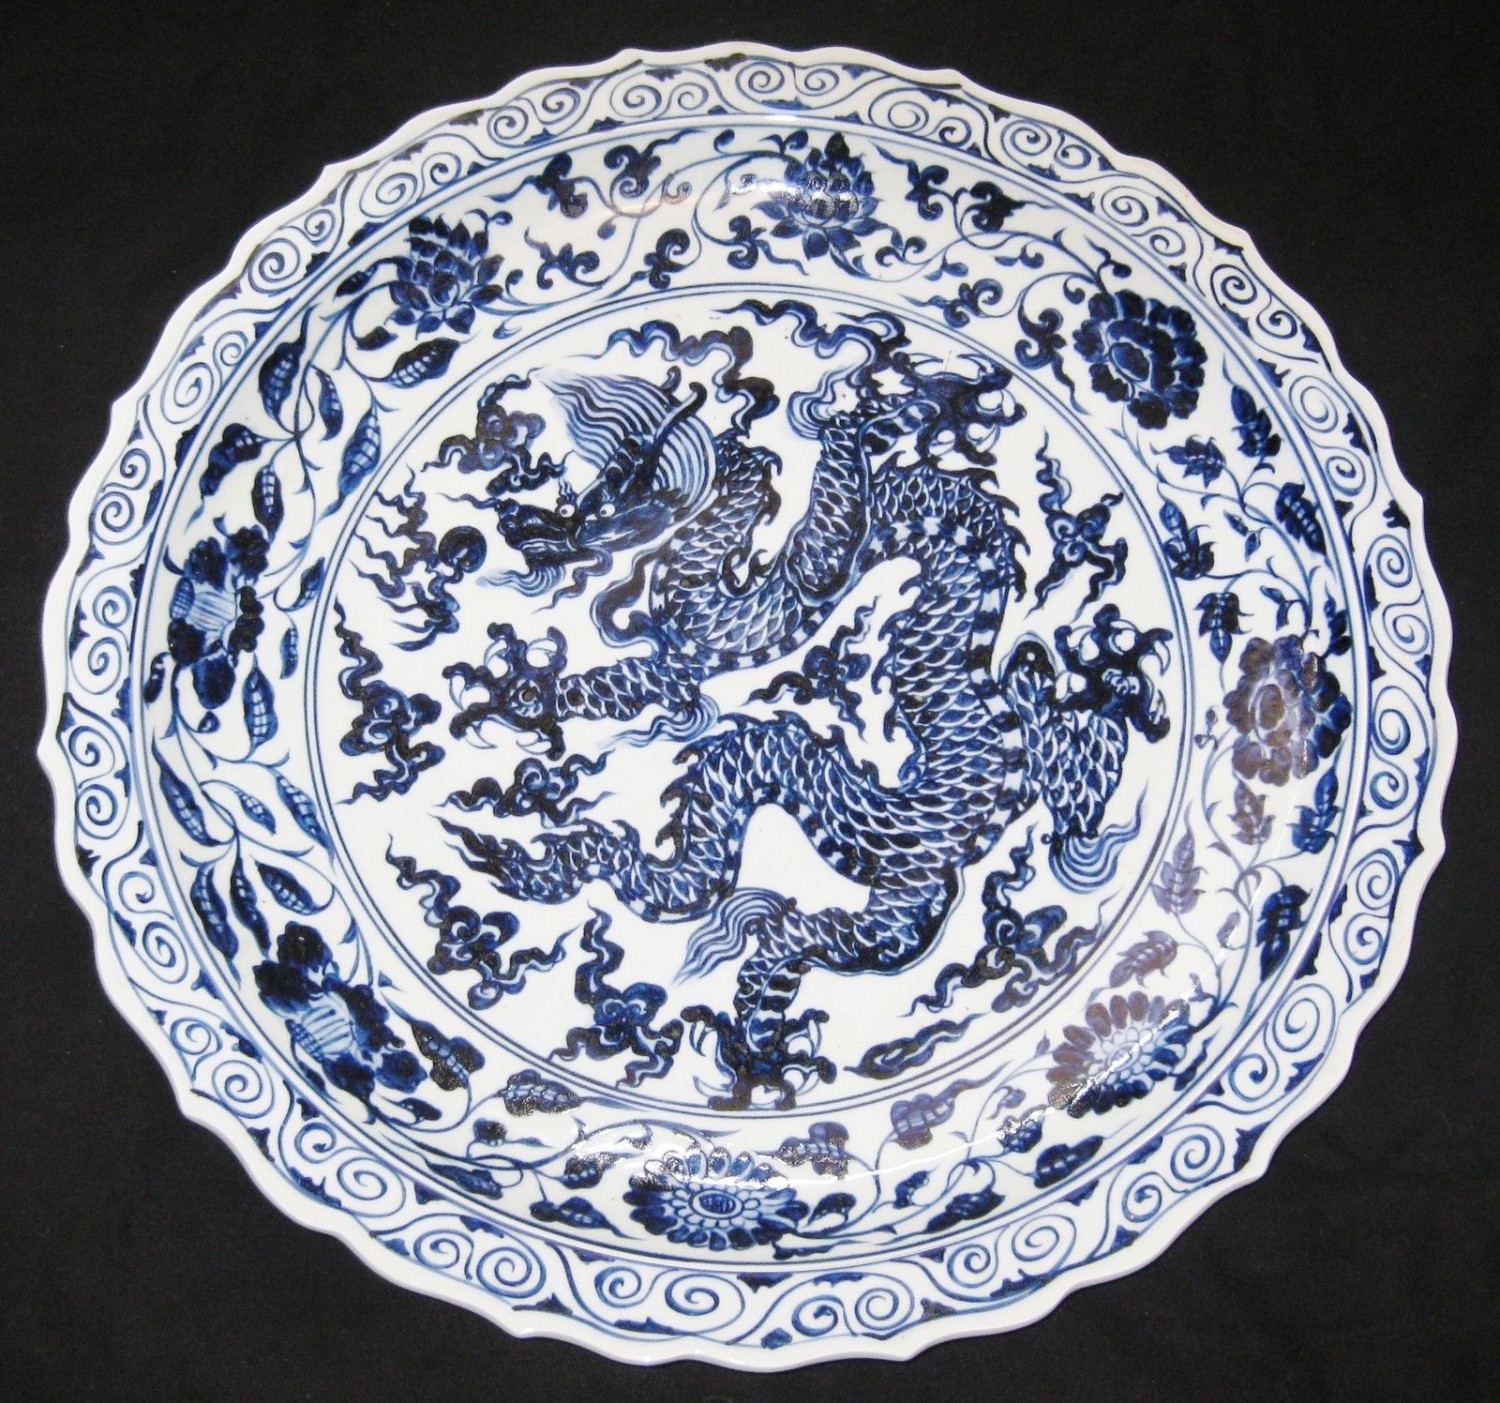 CHINESE DRAGON FIVE CLAWS PORCELAIN BLUE & WHITE HUGE PLATE, 19TH CENTURY.